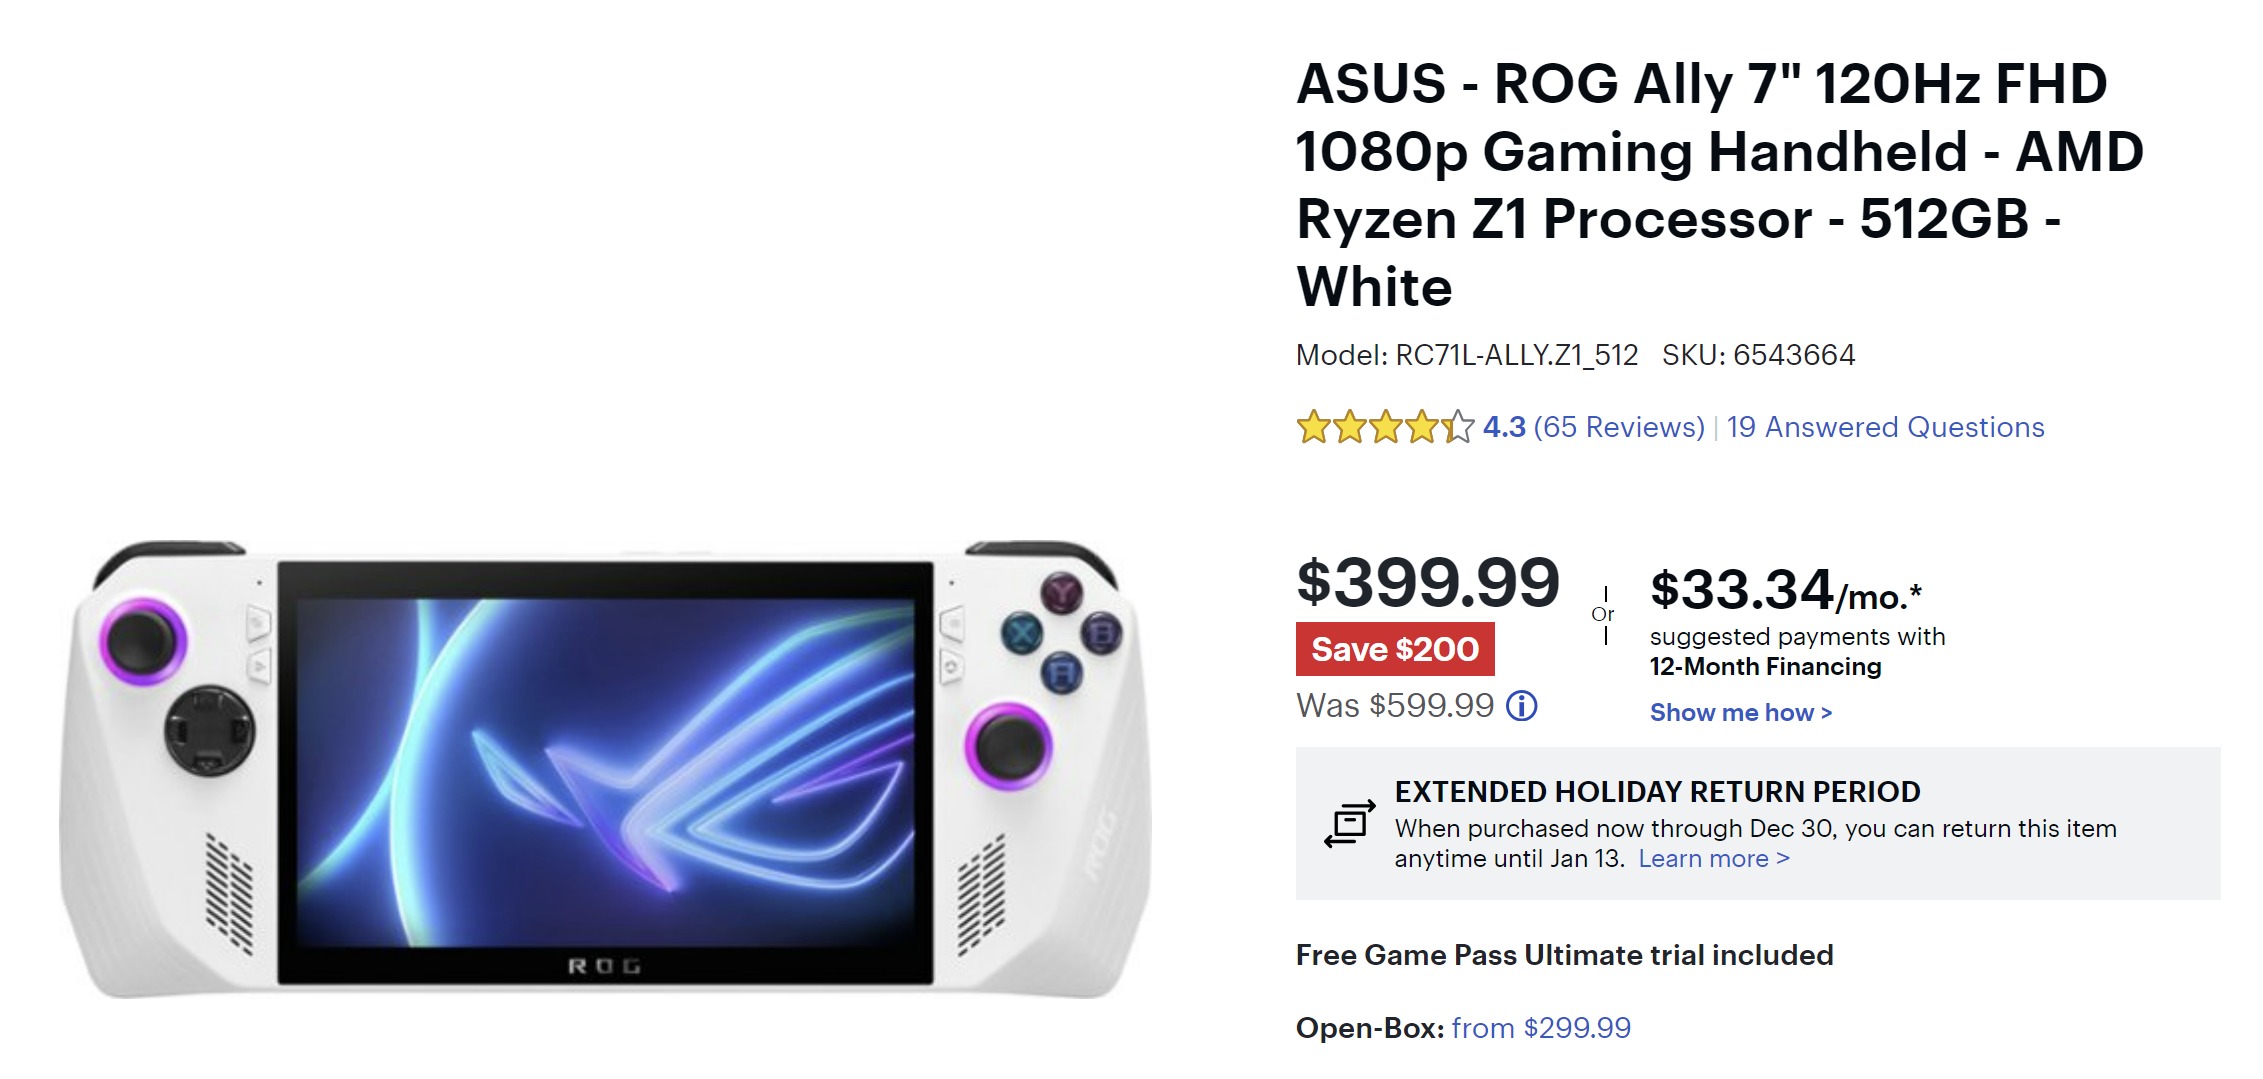 ASUS ROG Ally Z1 non-Extreme is now available for just $399